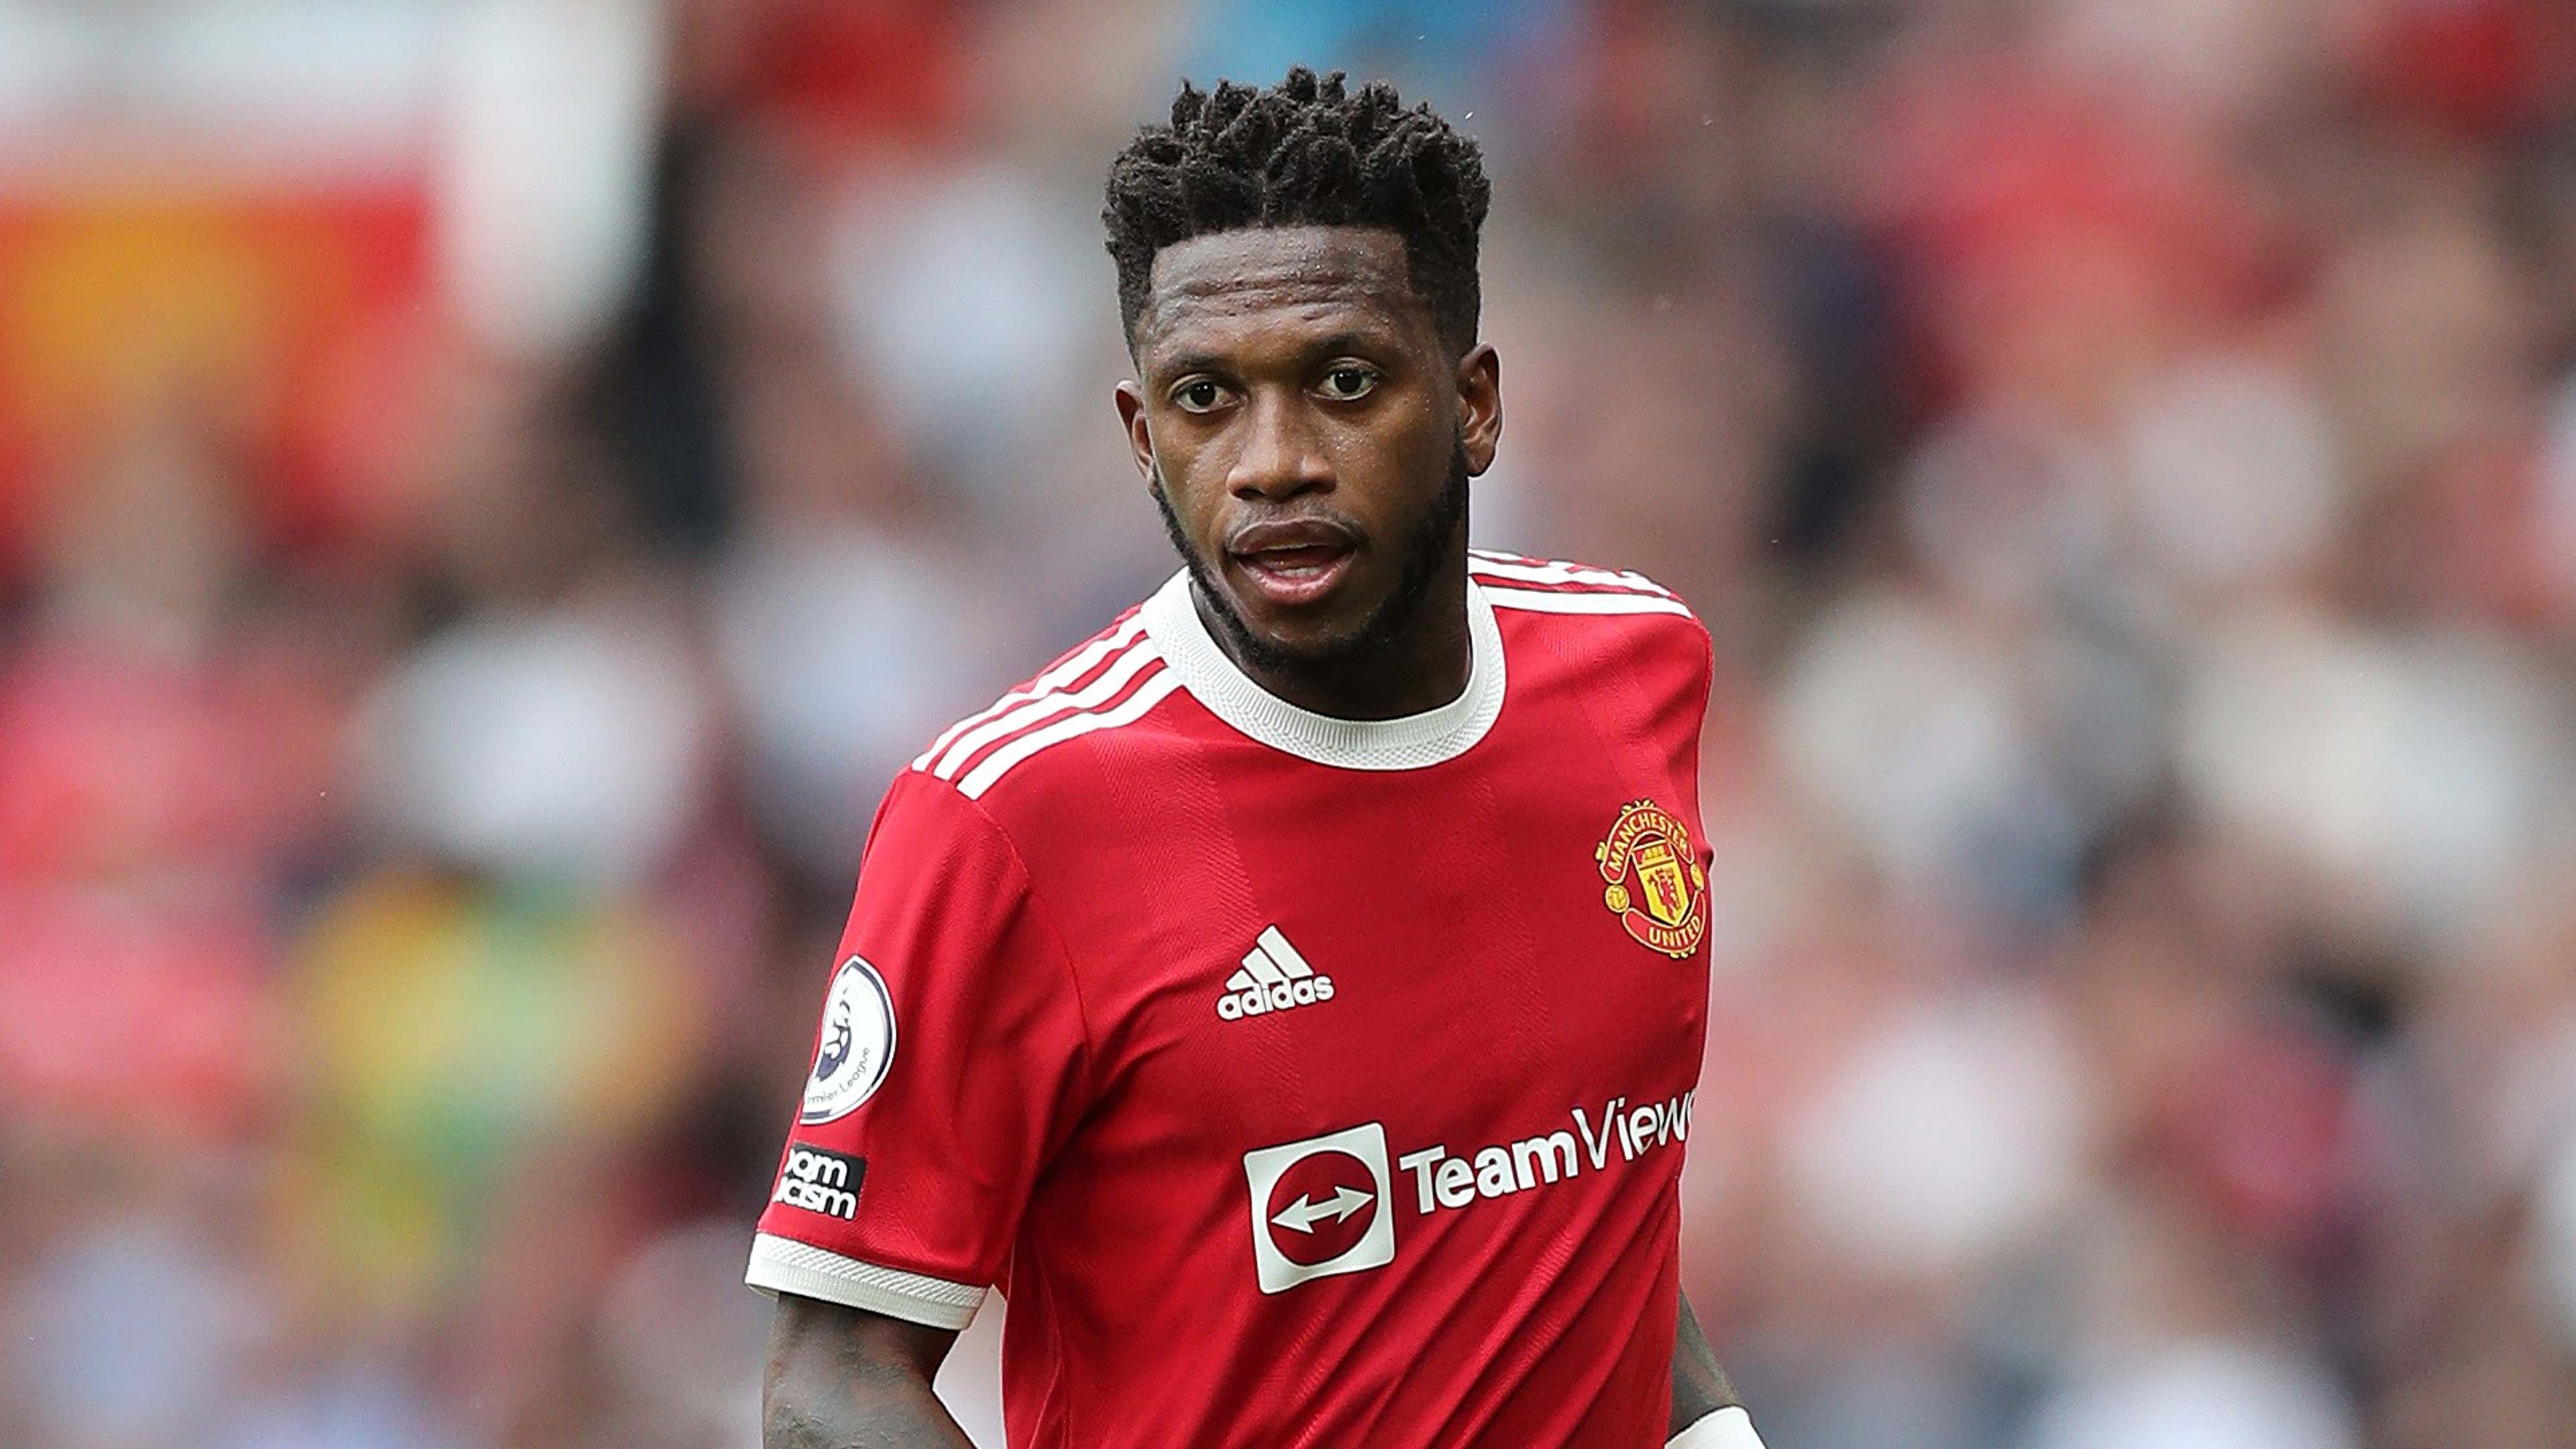 Fred Manchester United 2021-22